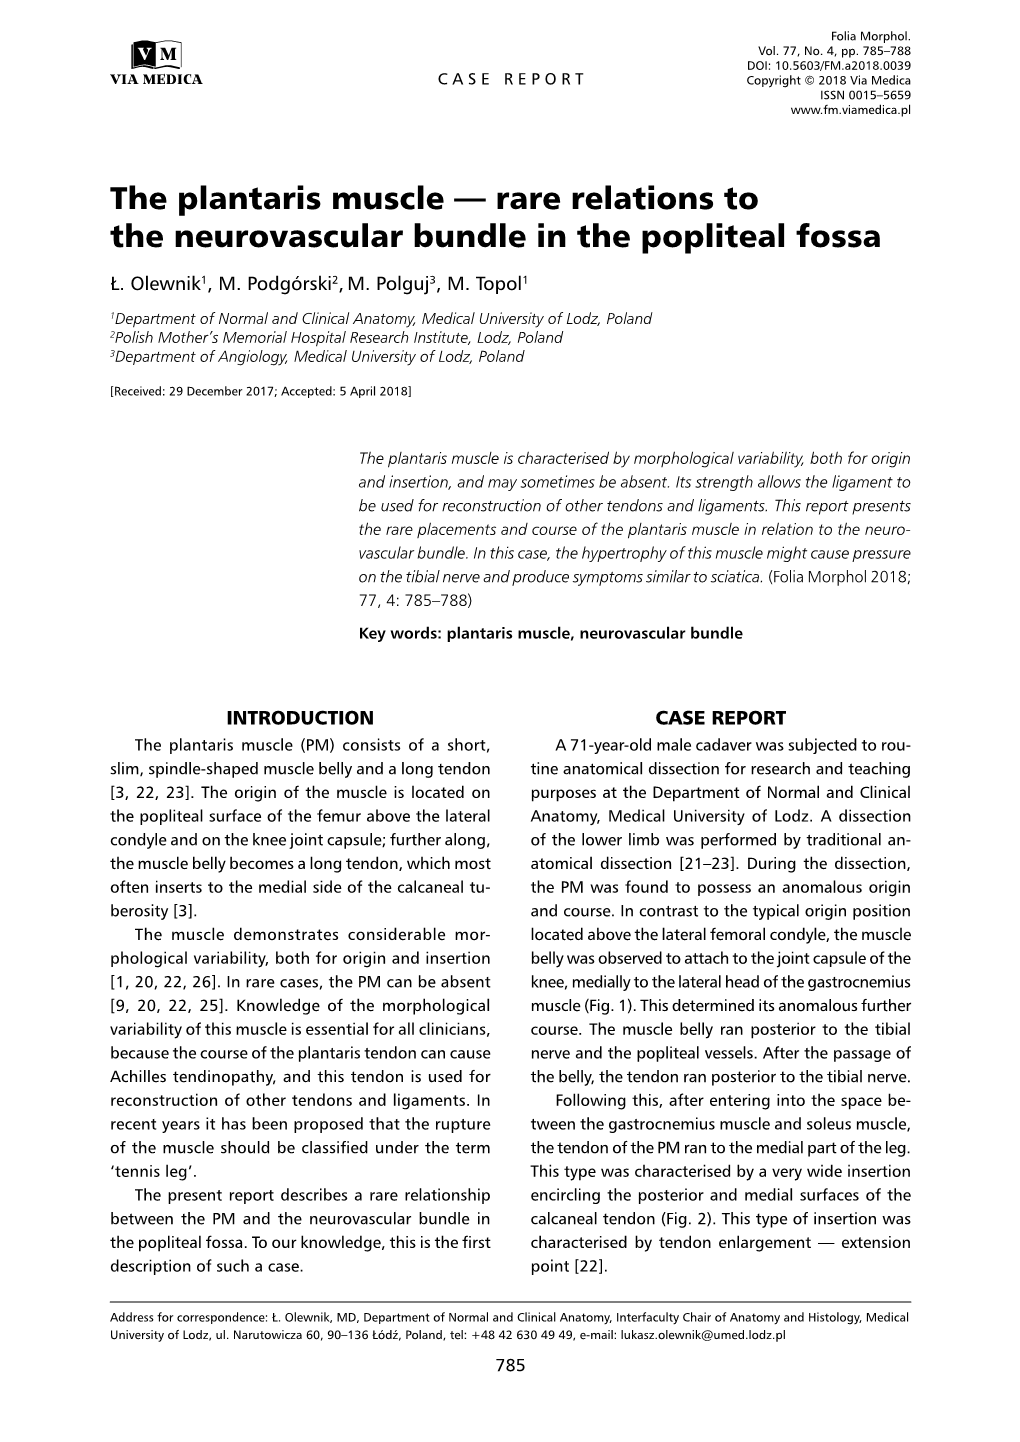 The Plantaris Muscle — Rare Relations to the Neurovascular Bundle in the Popliteal Fossa Ł